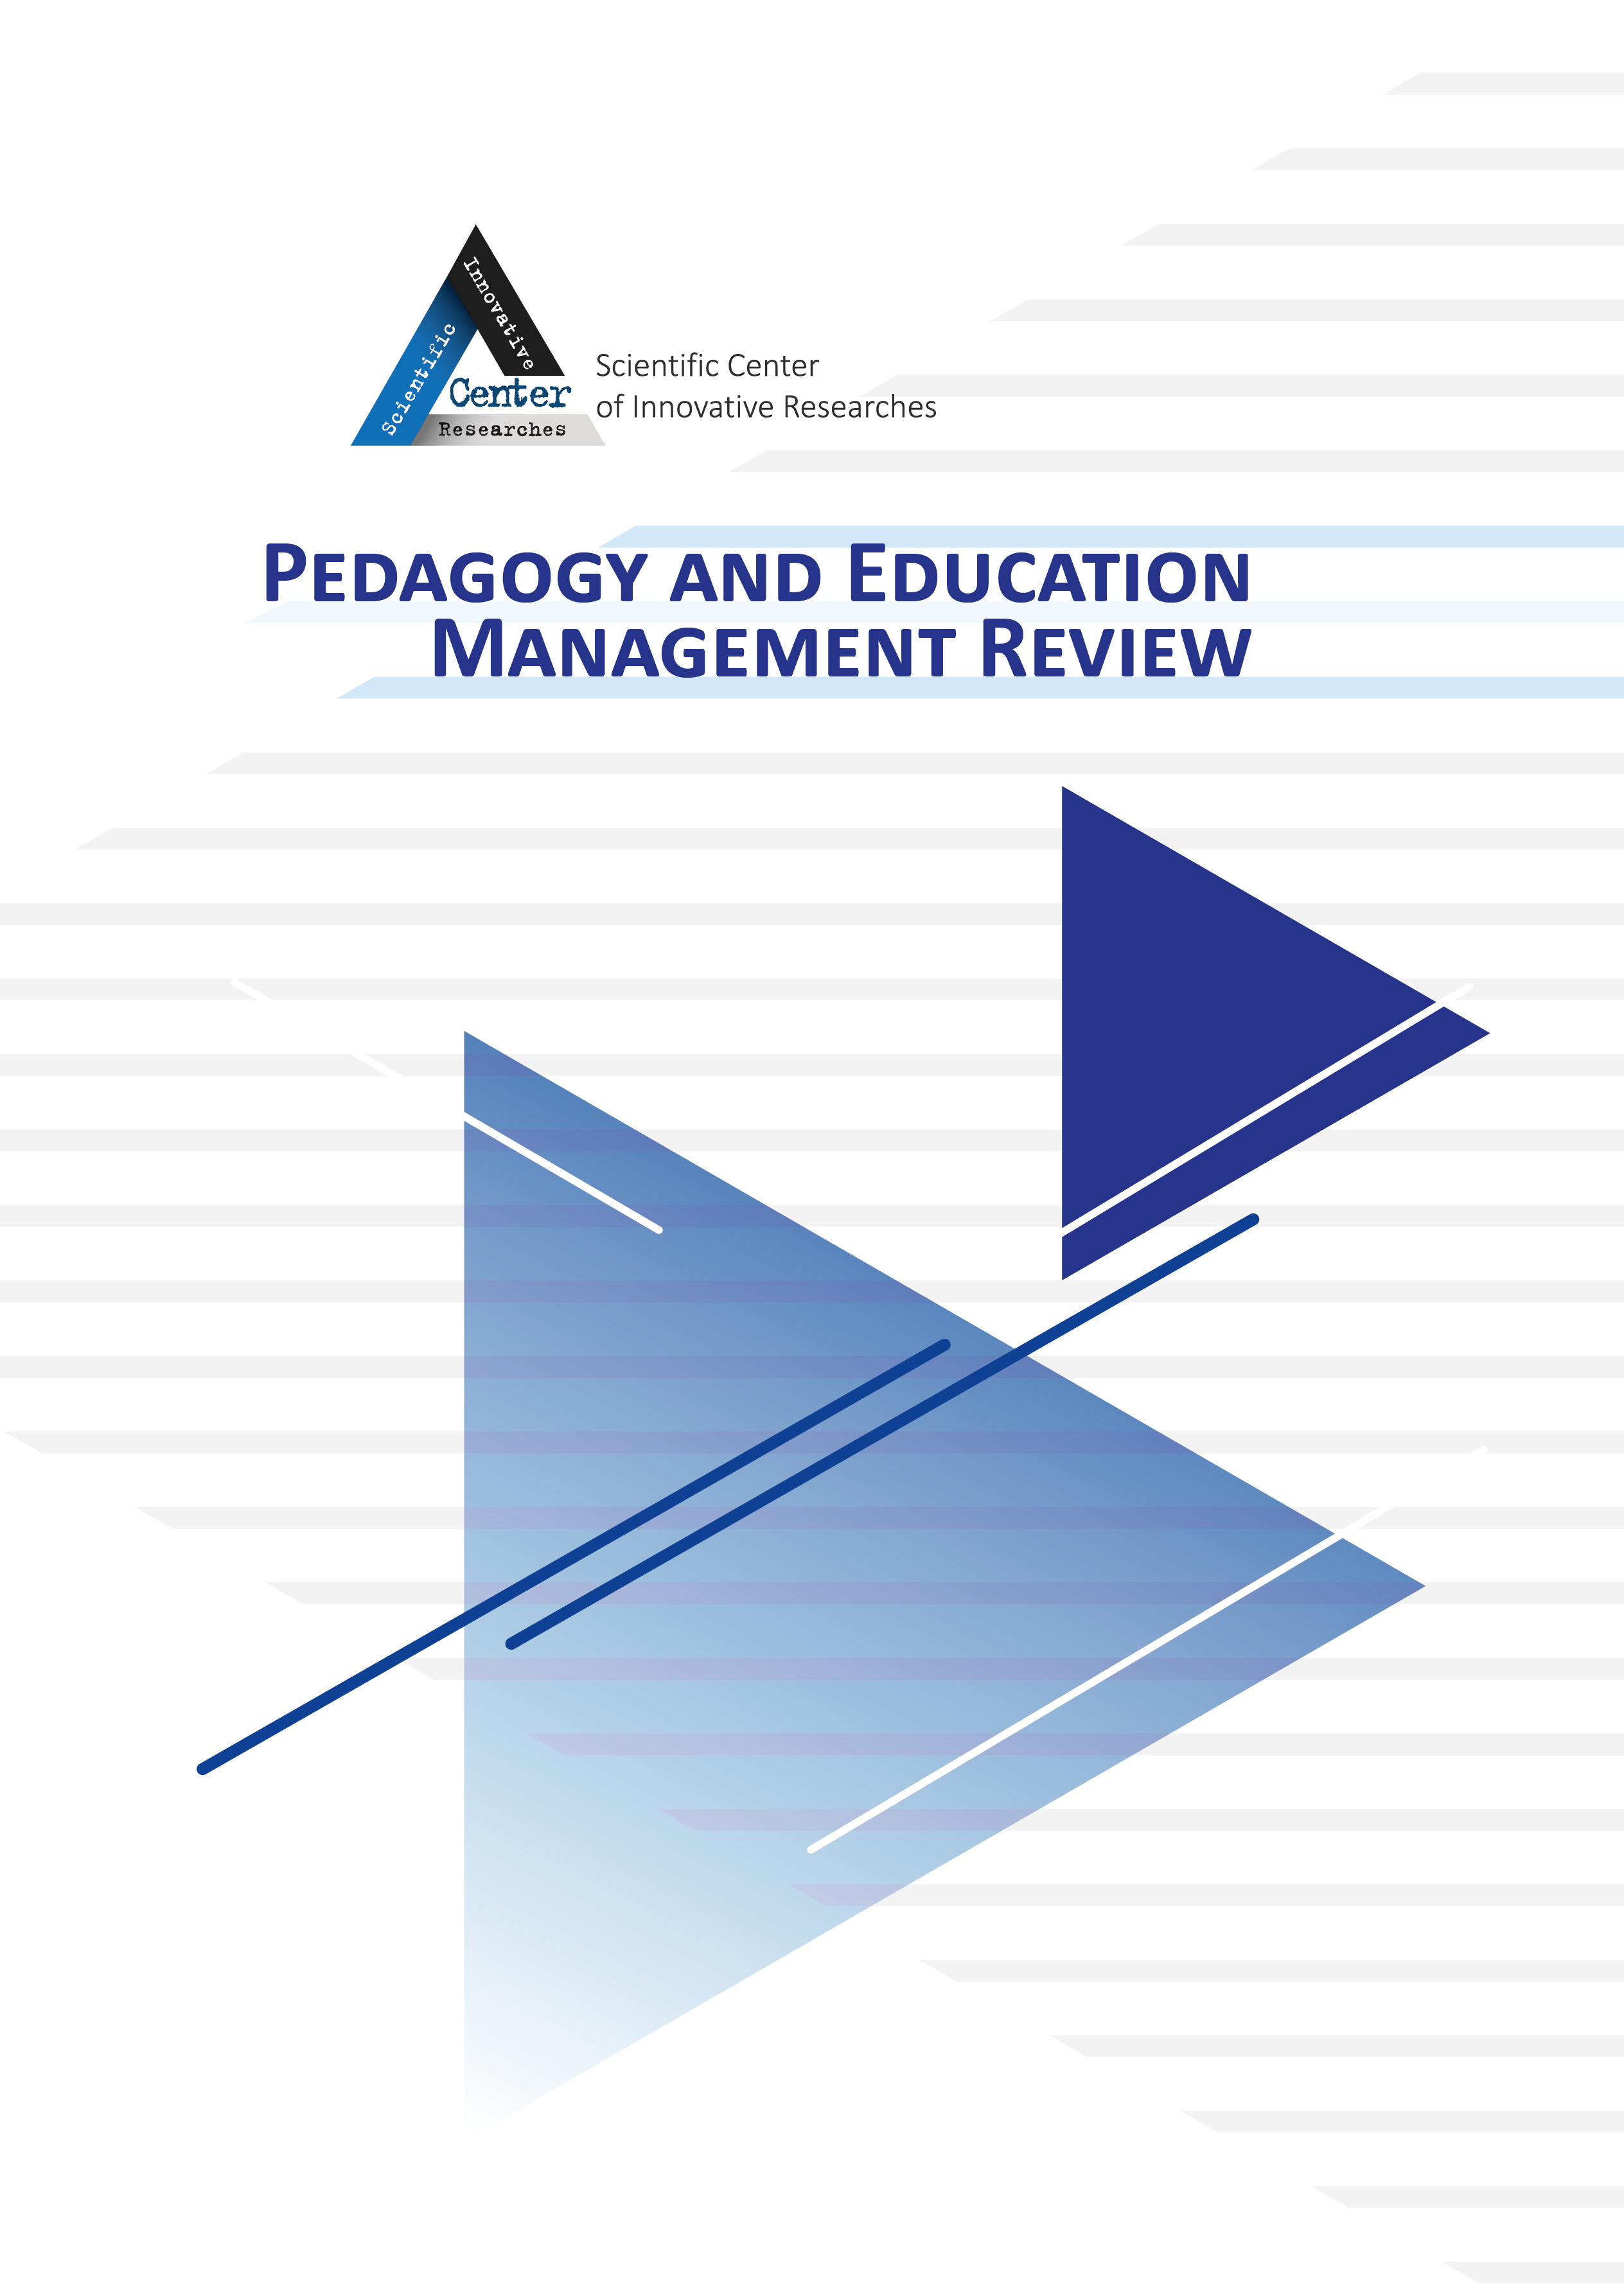 					View No. 3 (2022): PEDAGOGY AND EDUCATION MANAGEMENT REVIEW
				